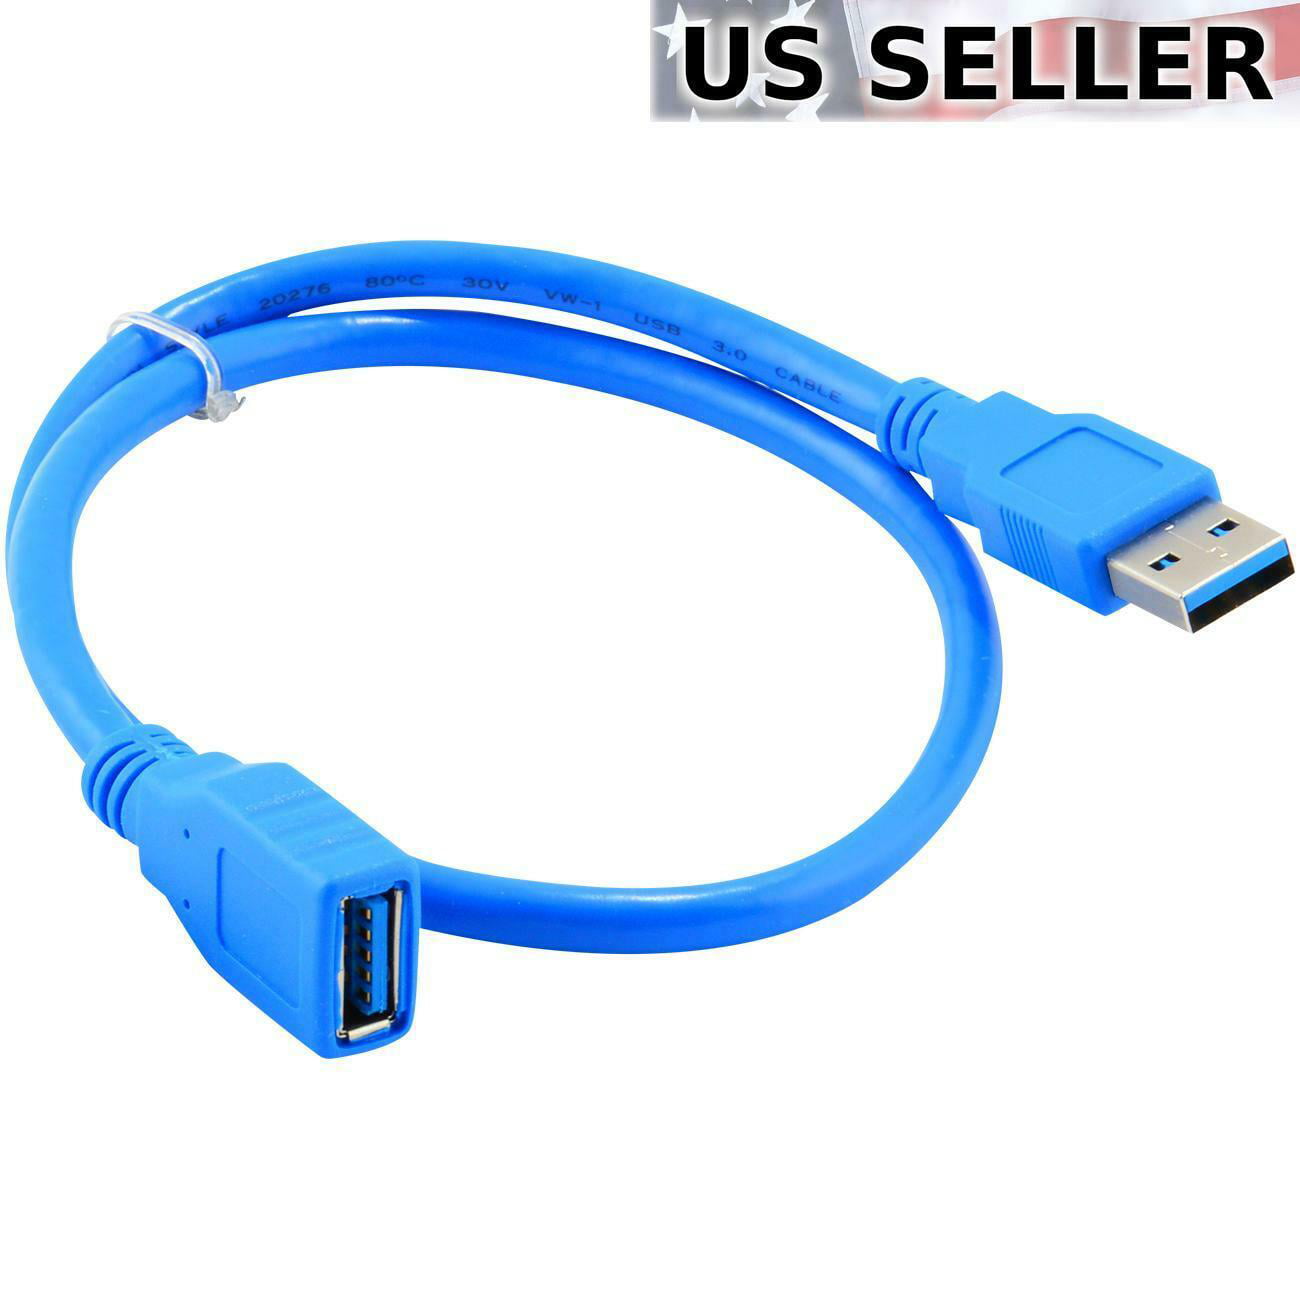 USB 2.0 Type A Female to USB A Female Cord Adapter Data Extension Cable Blue 1FT 